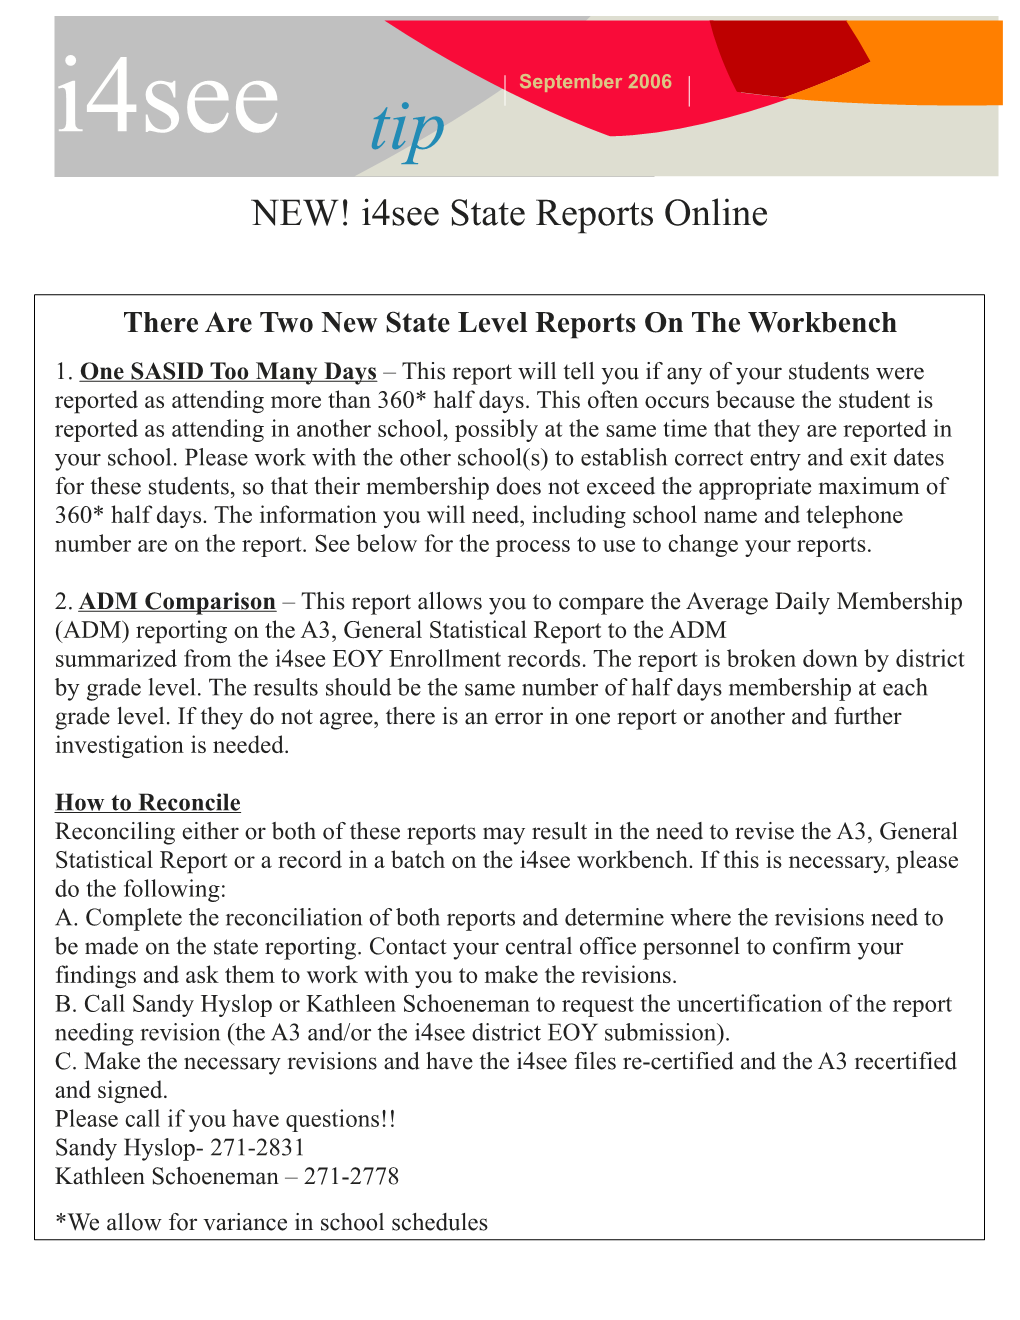 There Are Two New State Level Reports on the Workbench